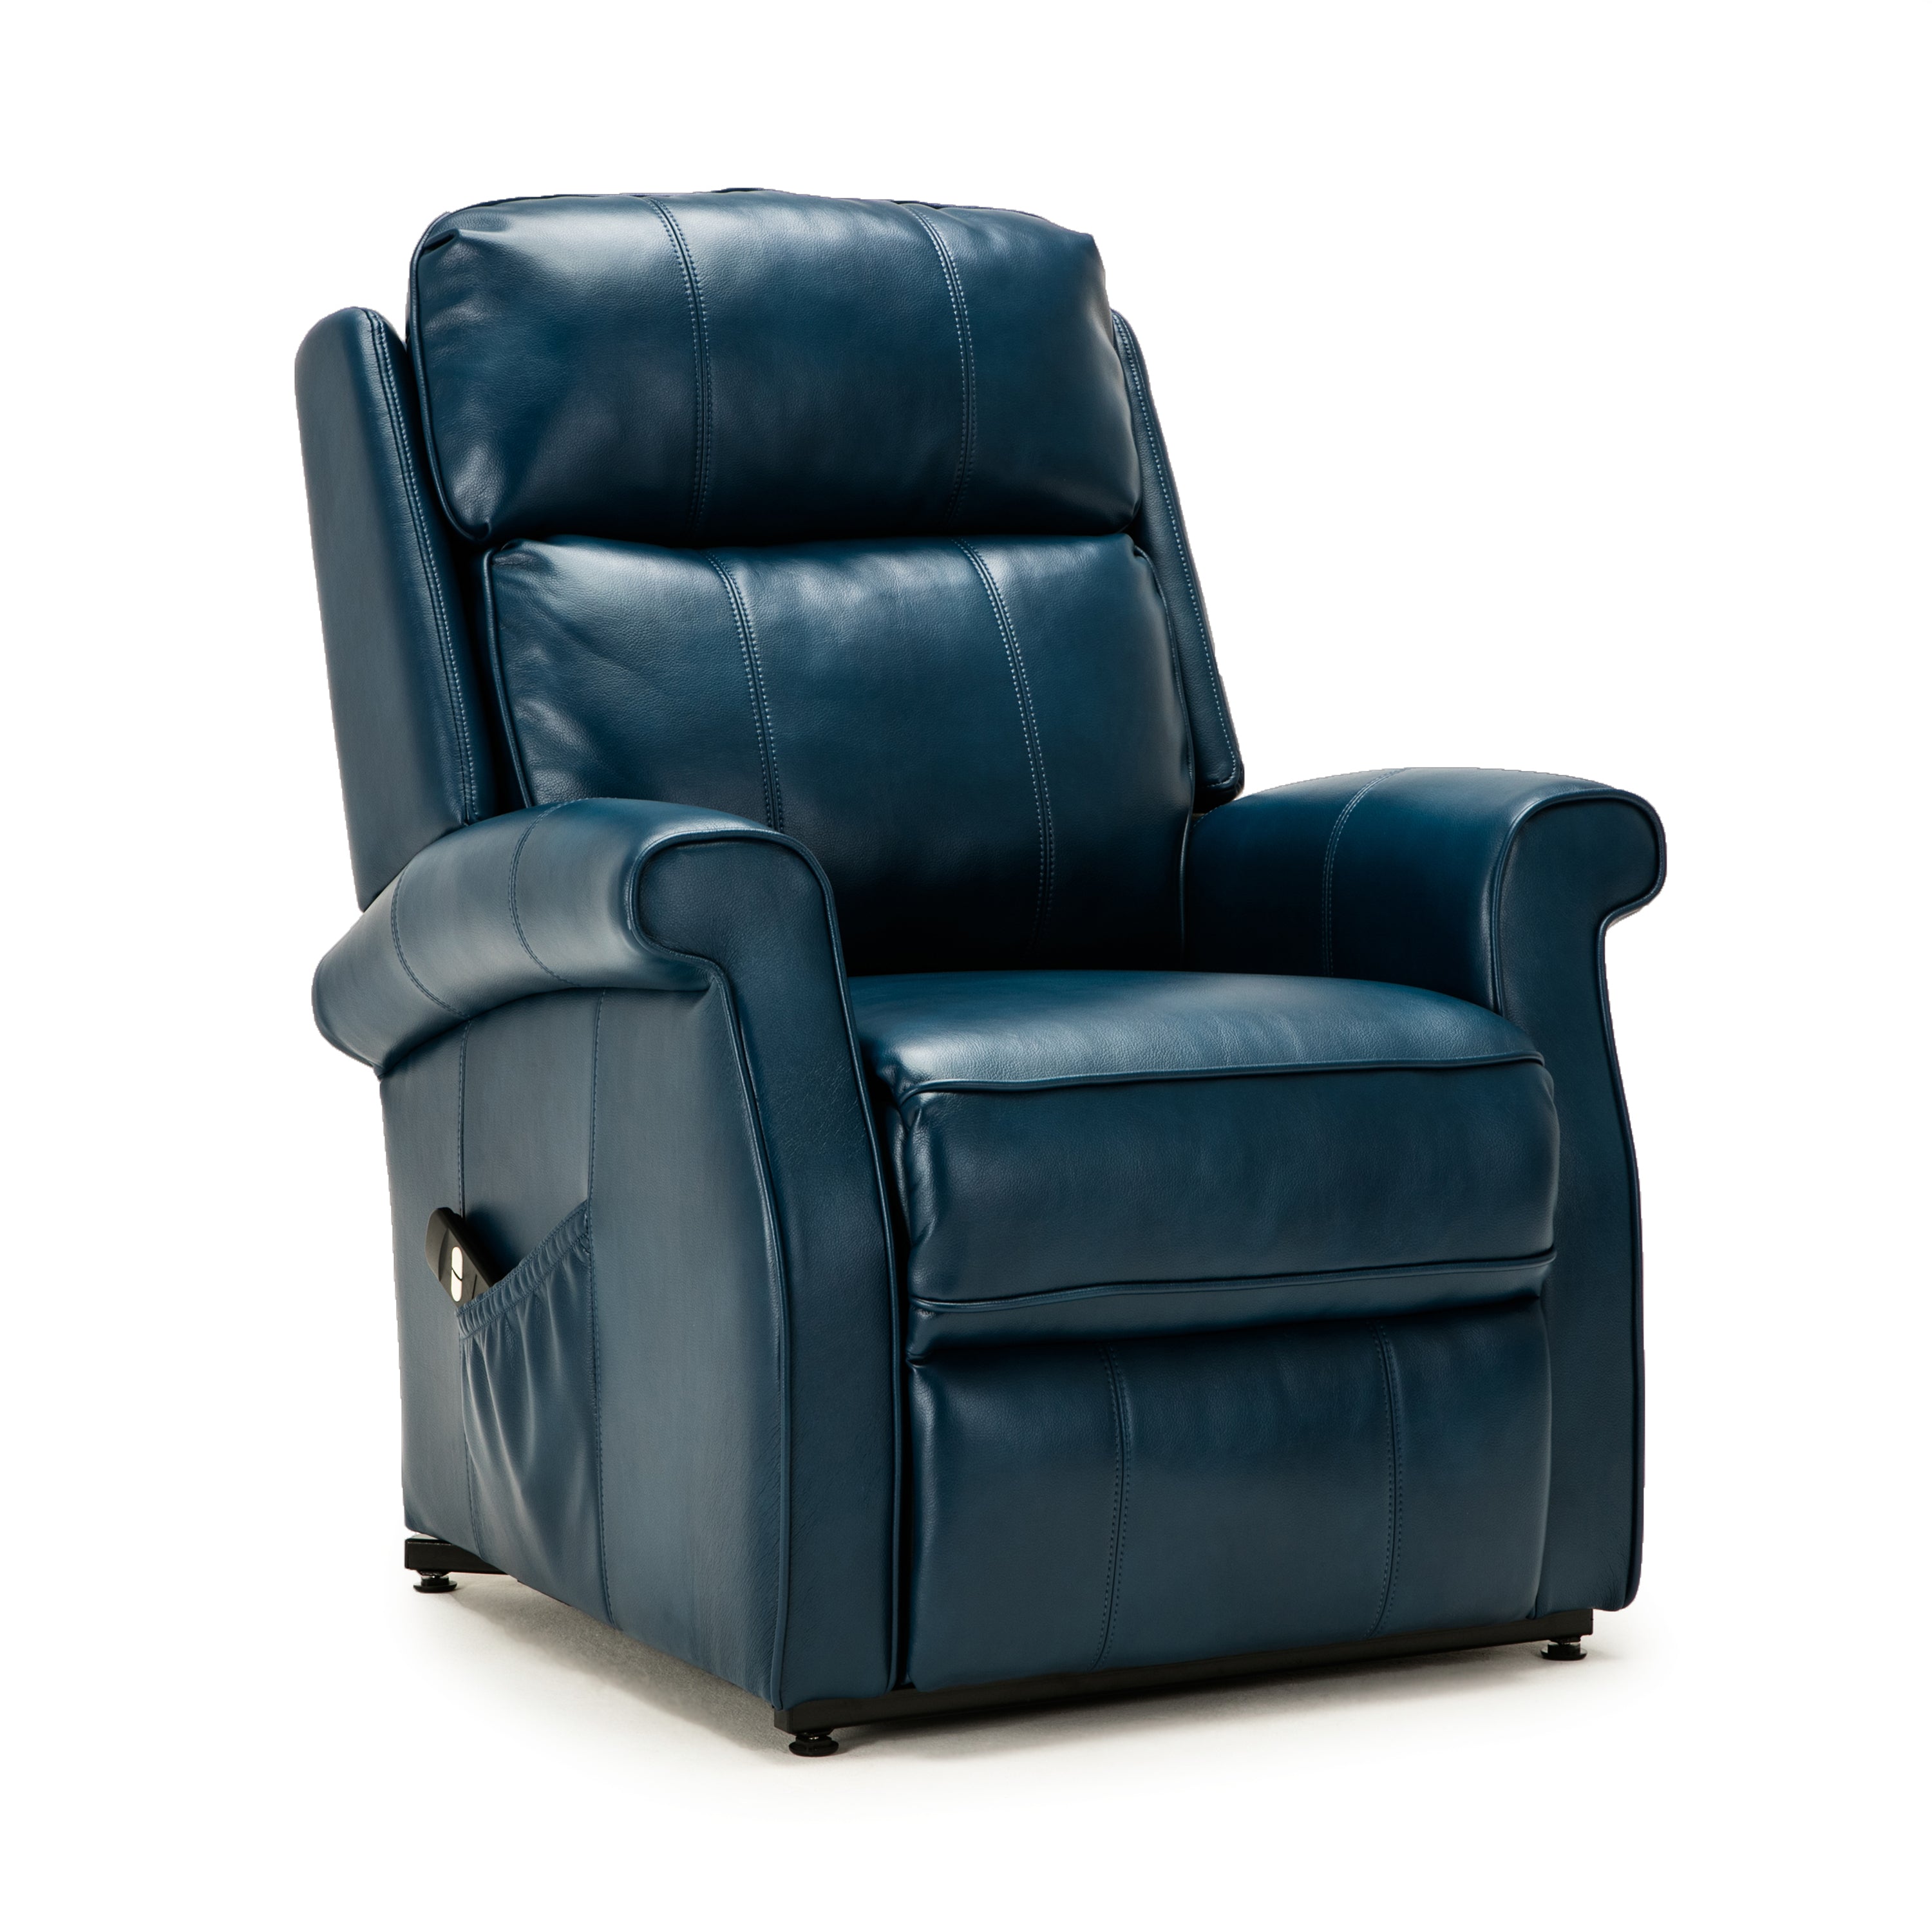 Landis Chair Navy Blue Lift Chair Recliner, seated